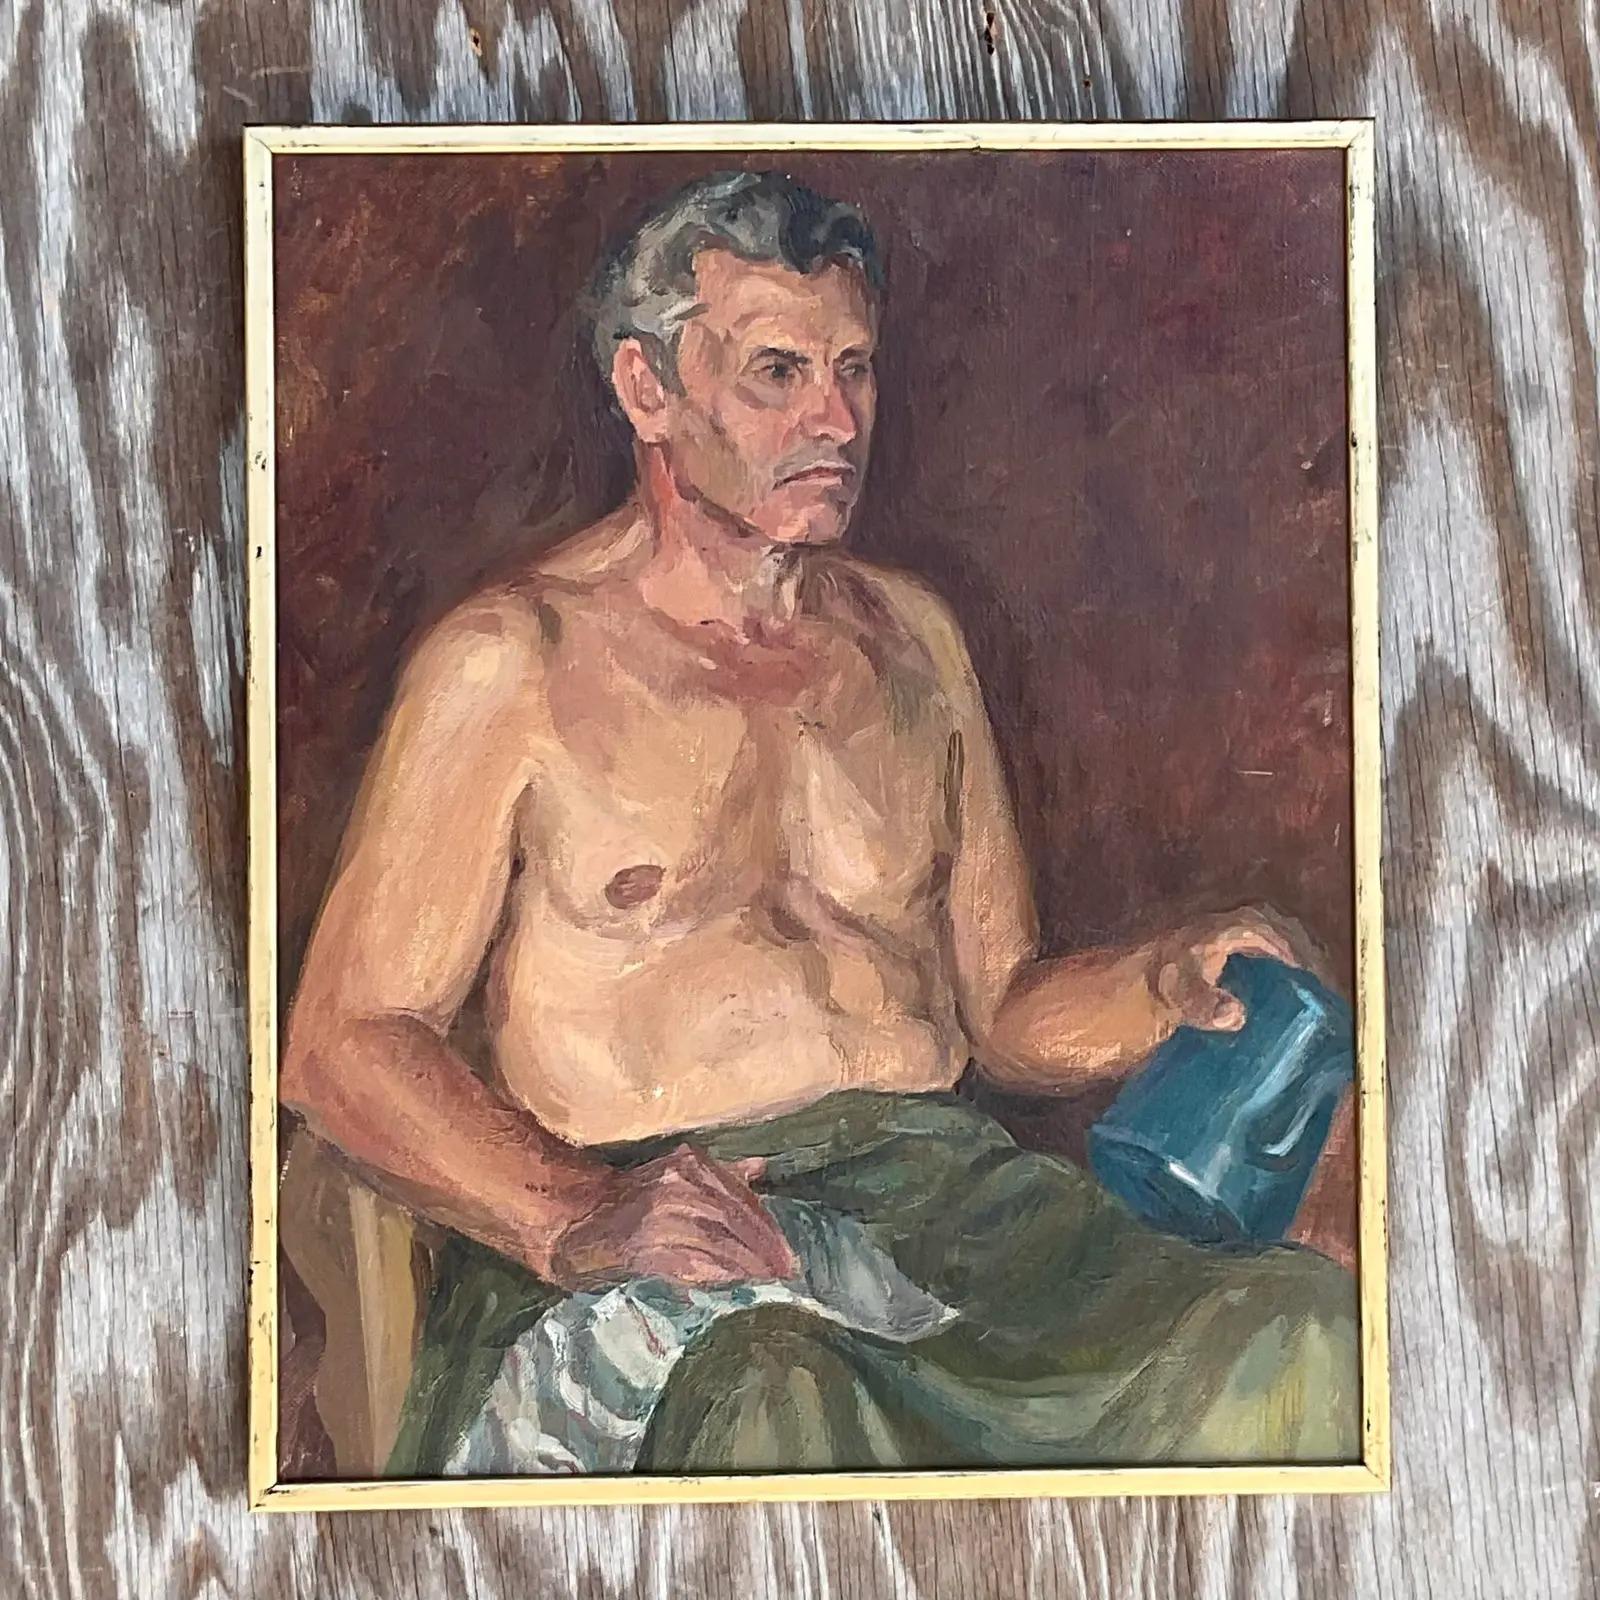 A fabulous vintage Boho original oil portrait on board. A chic composition of a handsome shirtless man. Deep rich color dominate the piece. Acquired from a Palm Beach estate.